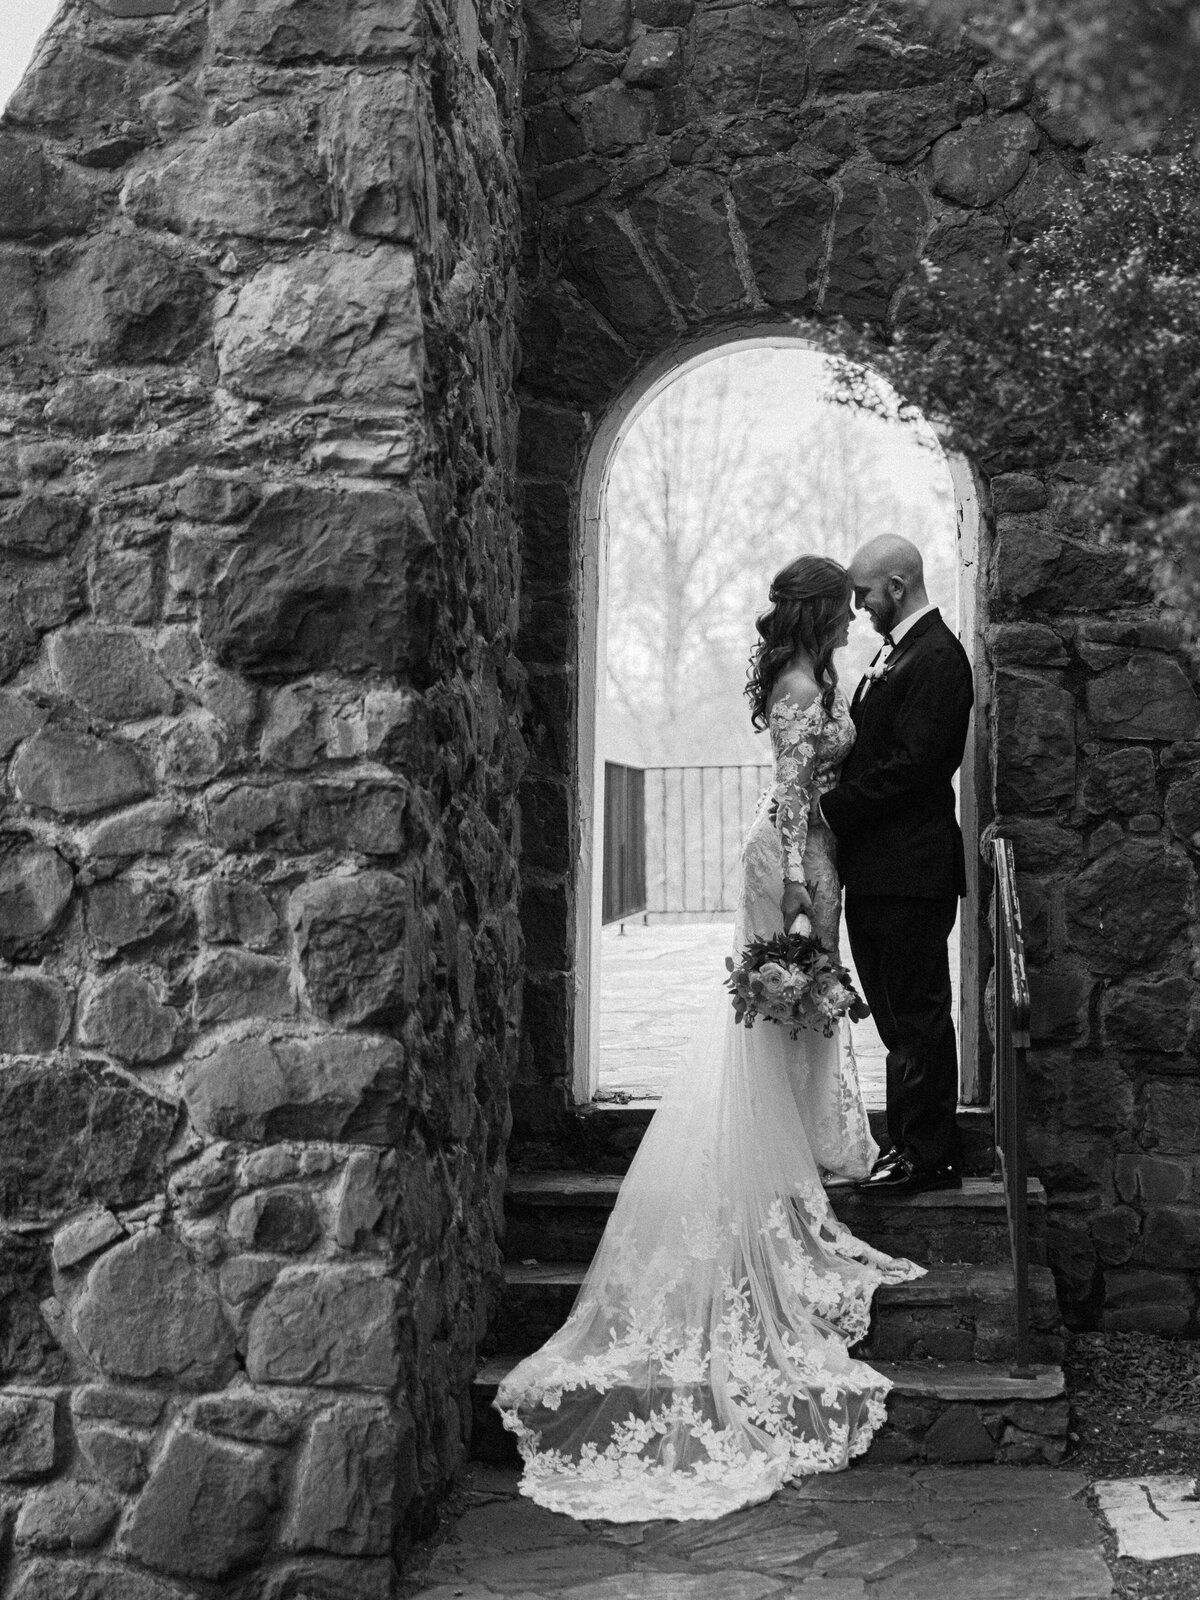 A bride and groom stand together foreheads touching under a stone archway as the bides's lace dress train falls elegantly down a set of stairs